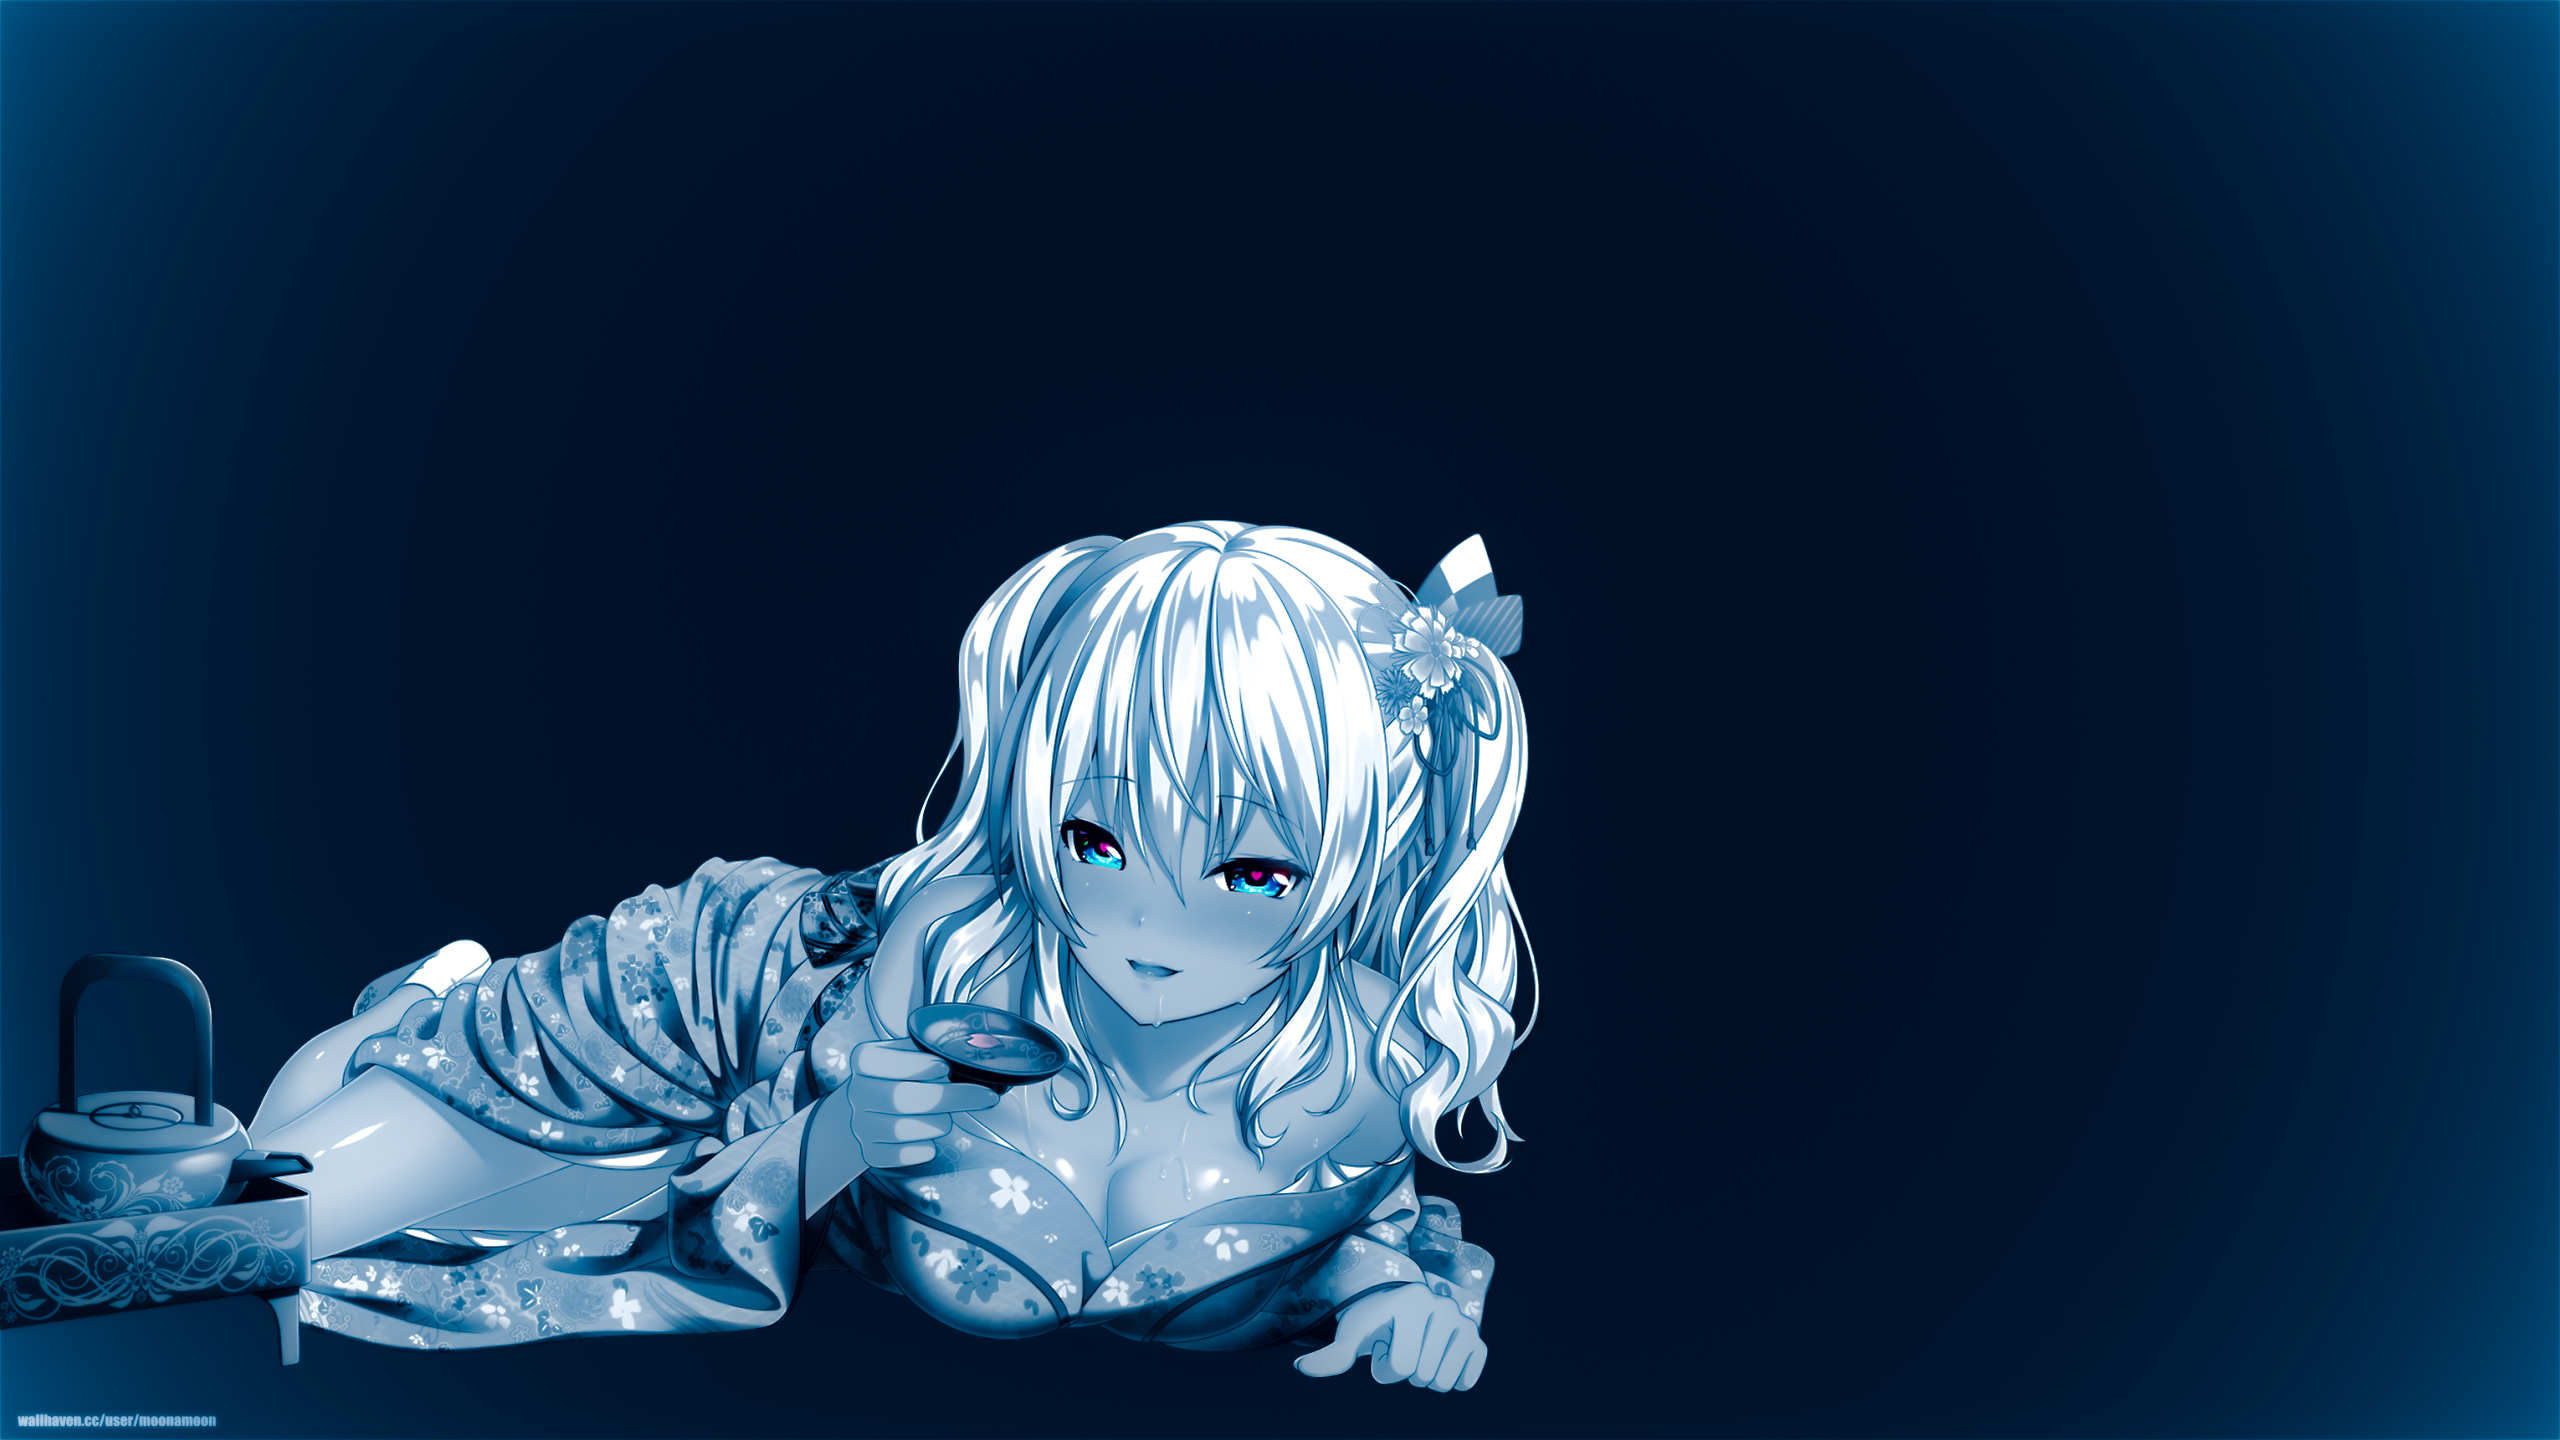 Anime 2560x1440 anime anime girls Kantai Collection Kashima (KanColle) heart eyes kimono cleavage boobs selective coloring suggestive open mouth sensual gaze lying on front simple background minimalism